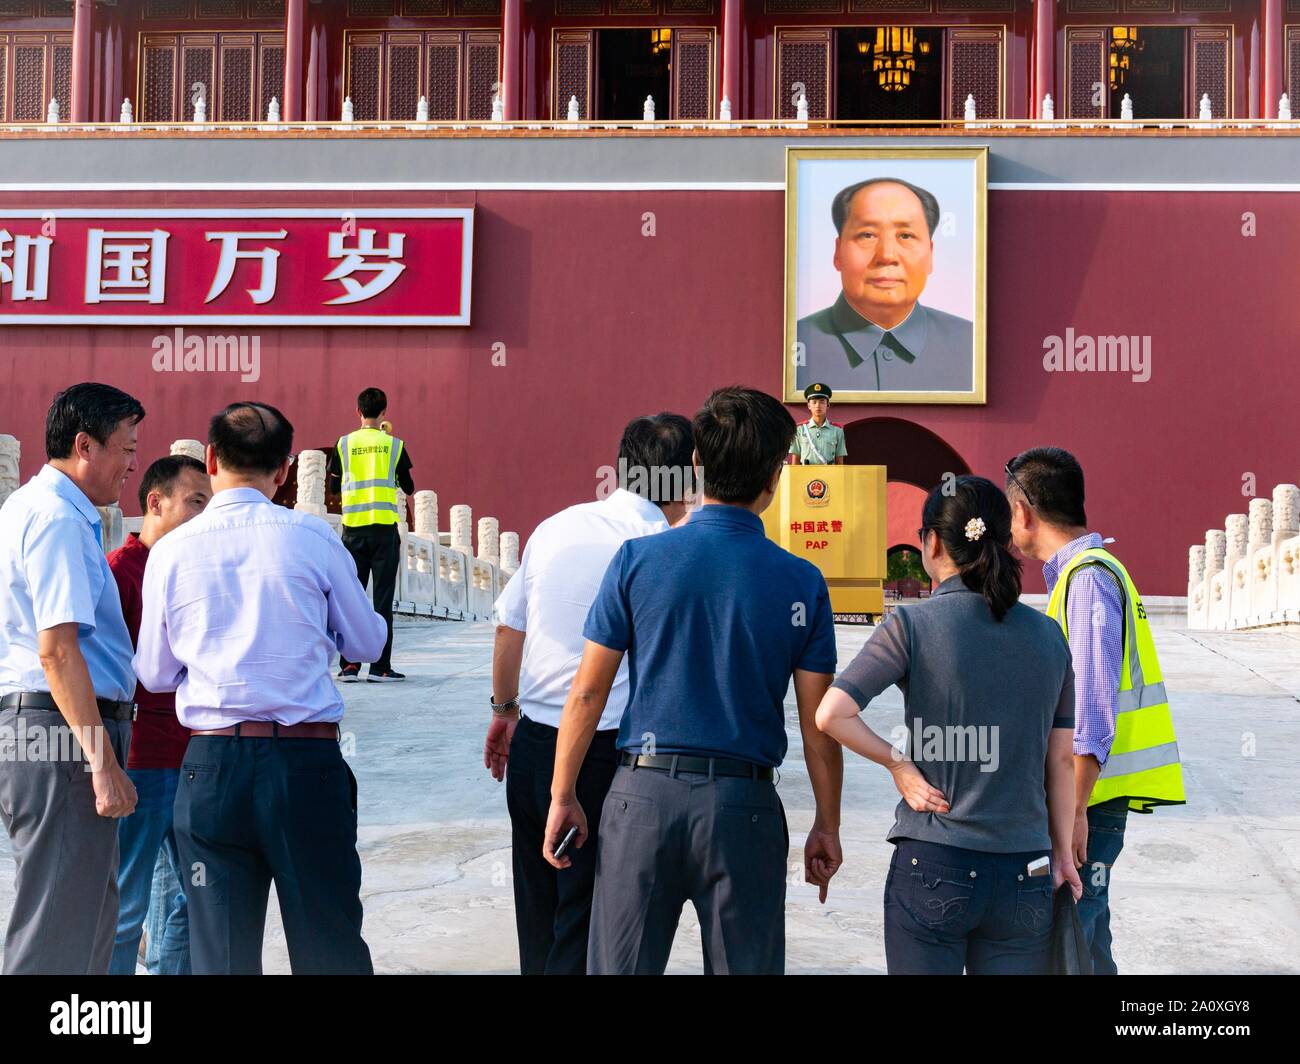 70th anniversary preparations for People’s Republic of China on October 1st 2019, Tiananmen Square, Beijing with group planning at Forbidden City gate Stock Photo